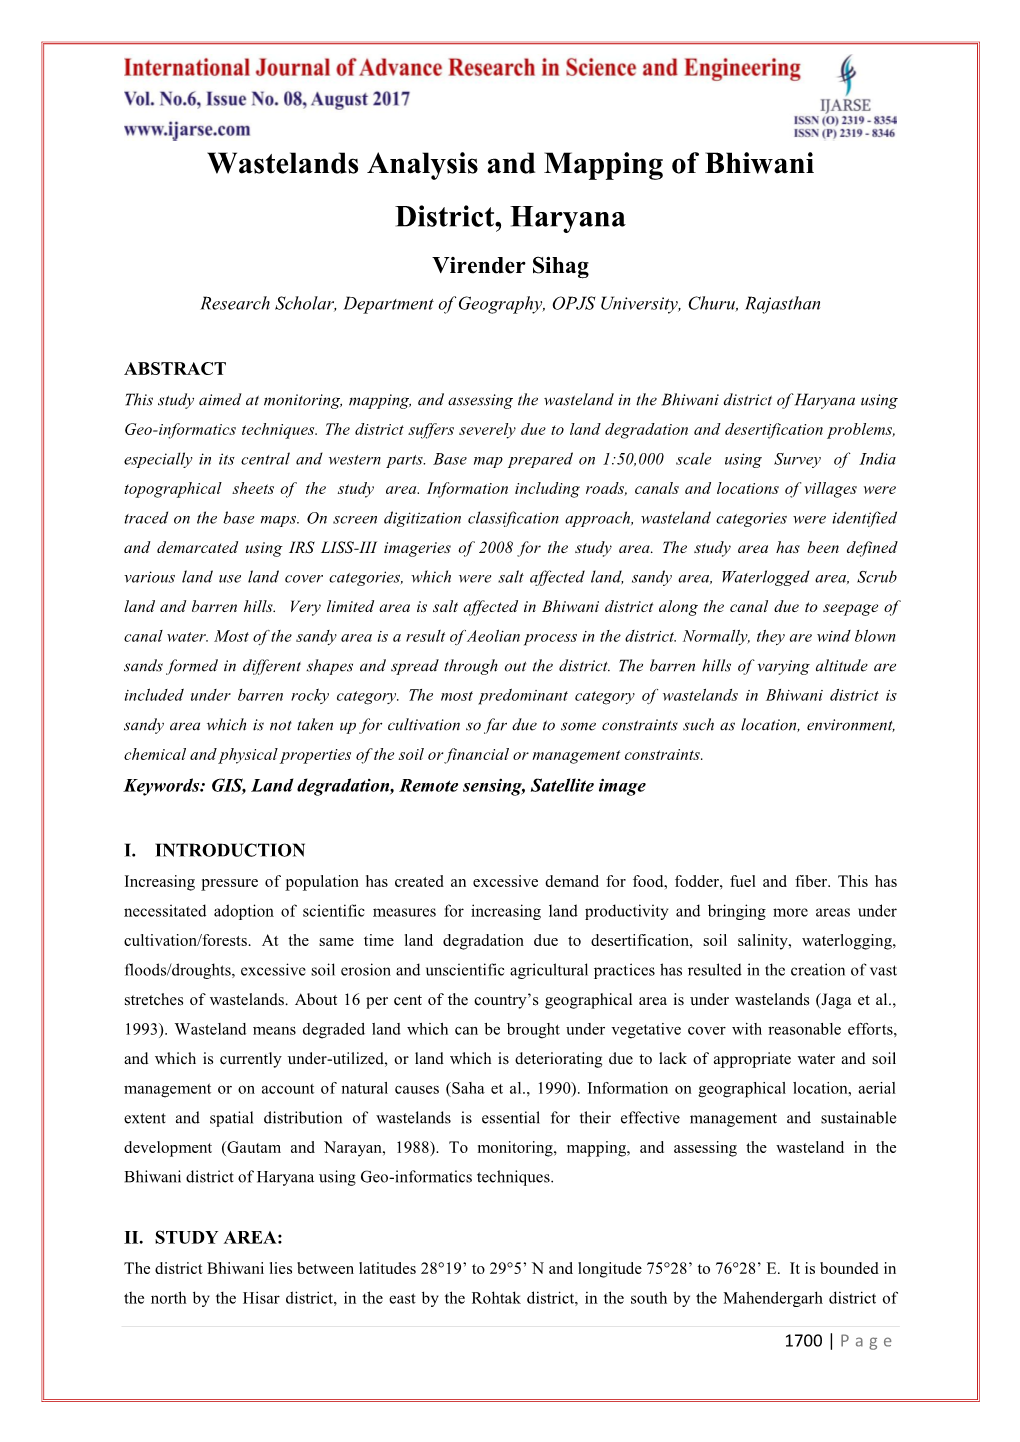 Wastelands Analysis and Mapping of Bhiwani District, Haryana Virender Sihag Research Scholar, Department of Geography, OPJS University, Churu, Rajasthan